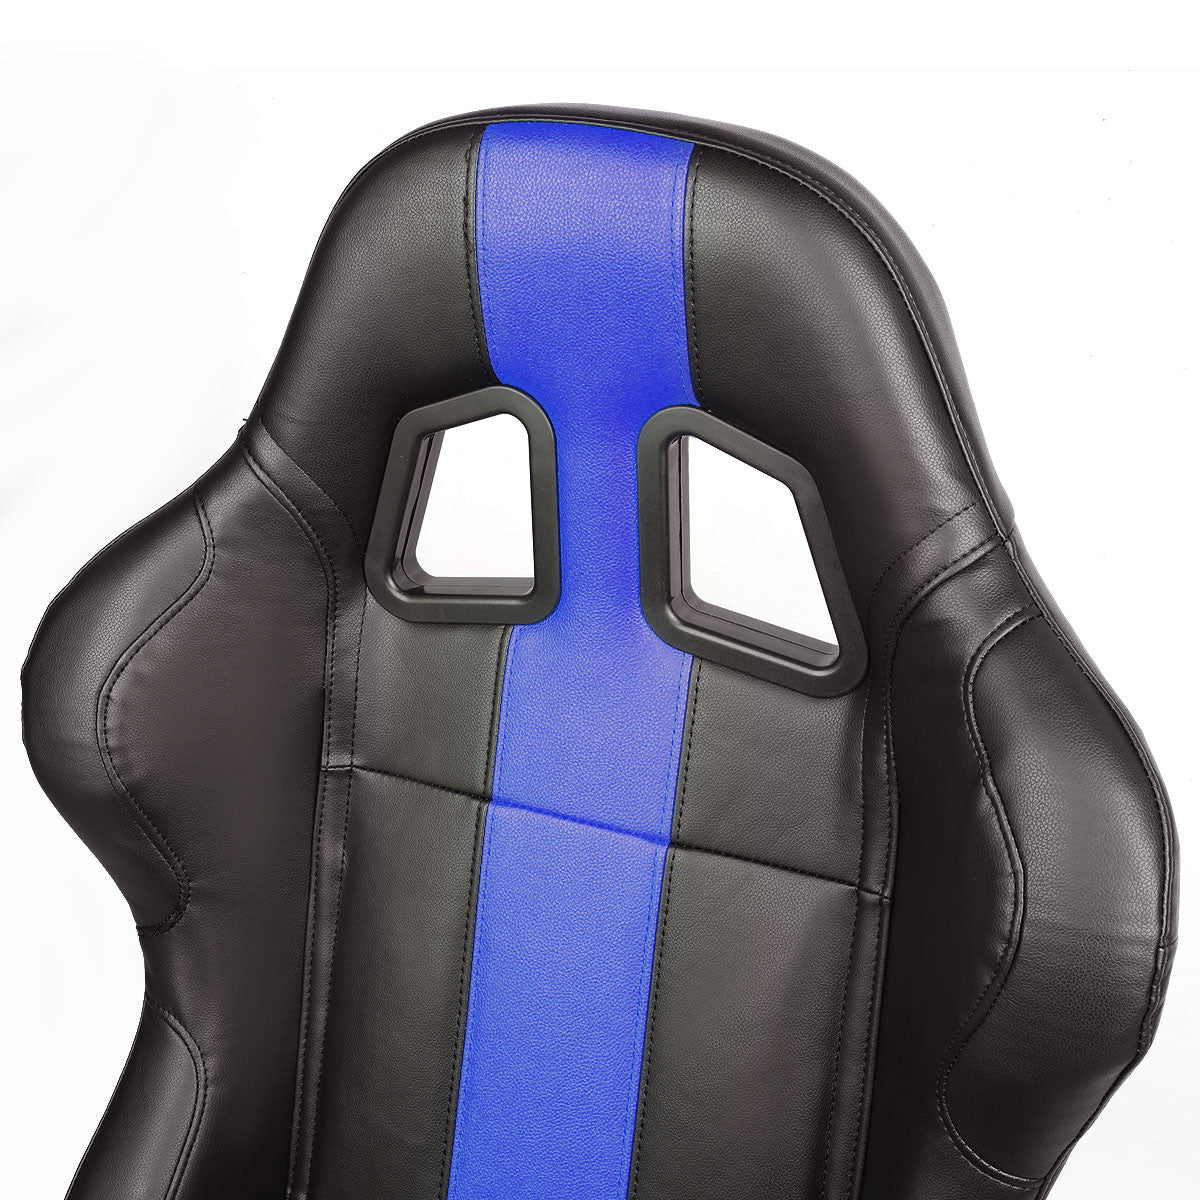 Racing Seats - Reclinable Leather - Type-R - Pair